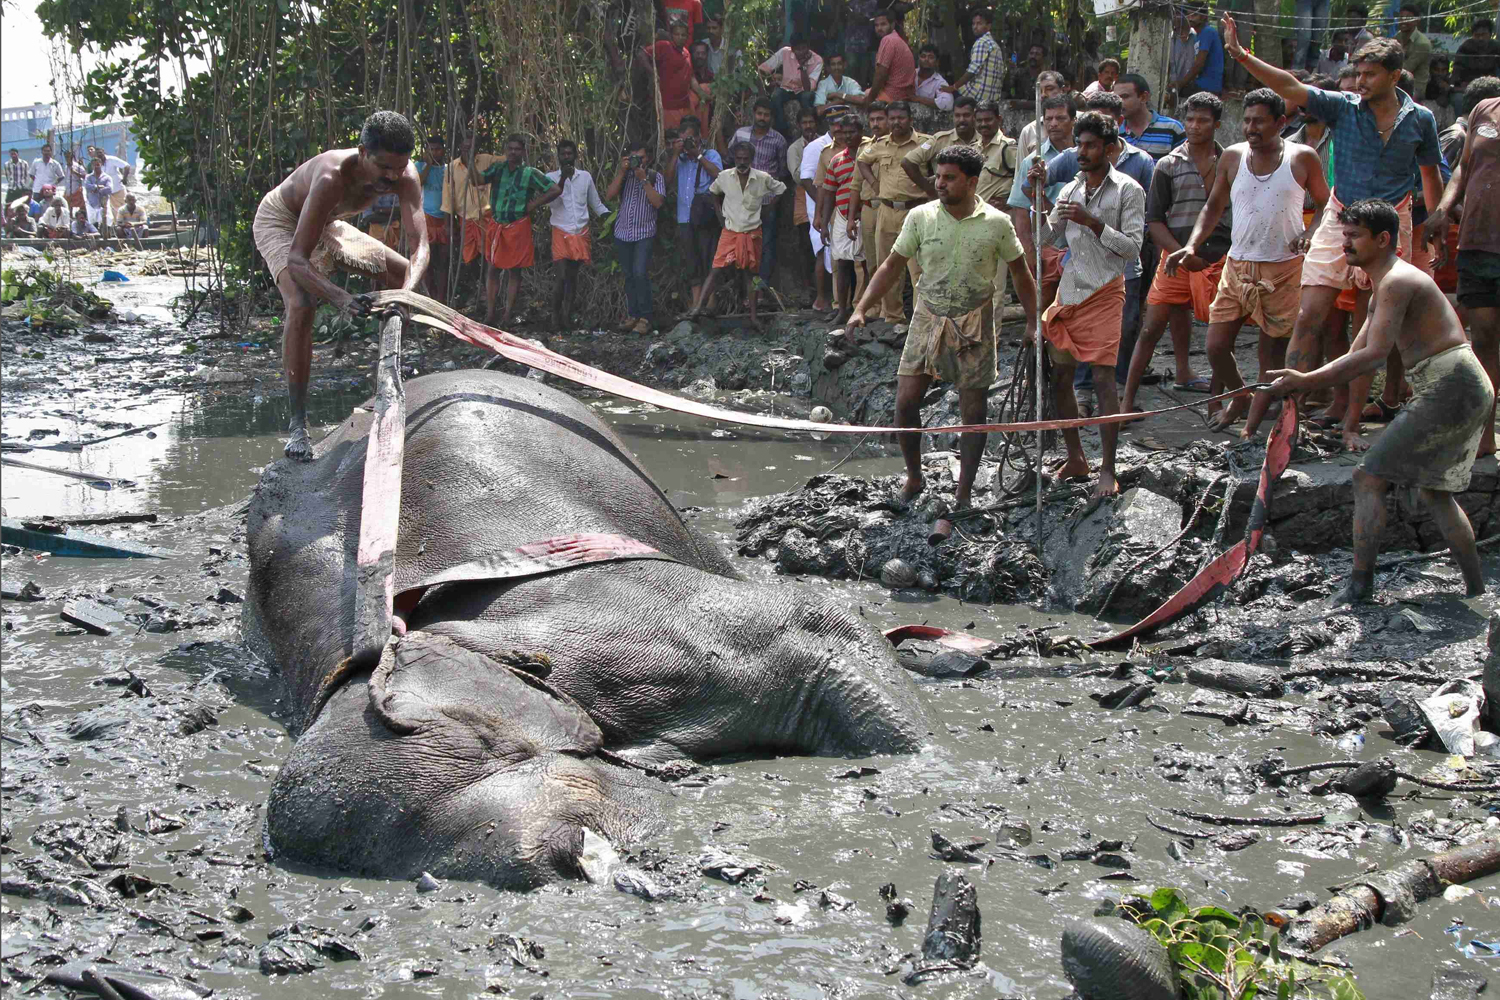 Feb. 6, 2014. A mahout ties a rope around an elephant named Ayyappan after it fell on marshy land on the banks of the Vembanad Lake on the outskirts of southern Indian city of Kochi. The elephant was brought to the banks of the lake after nearly six hours of rescue operation but died while receiving treatment.